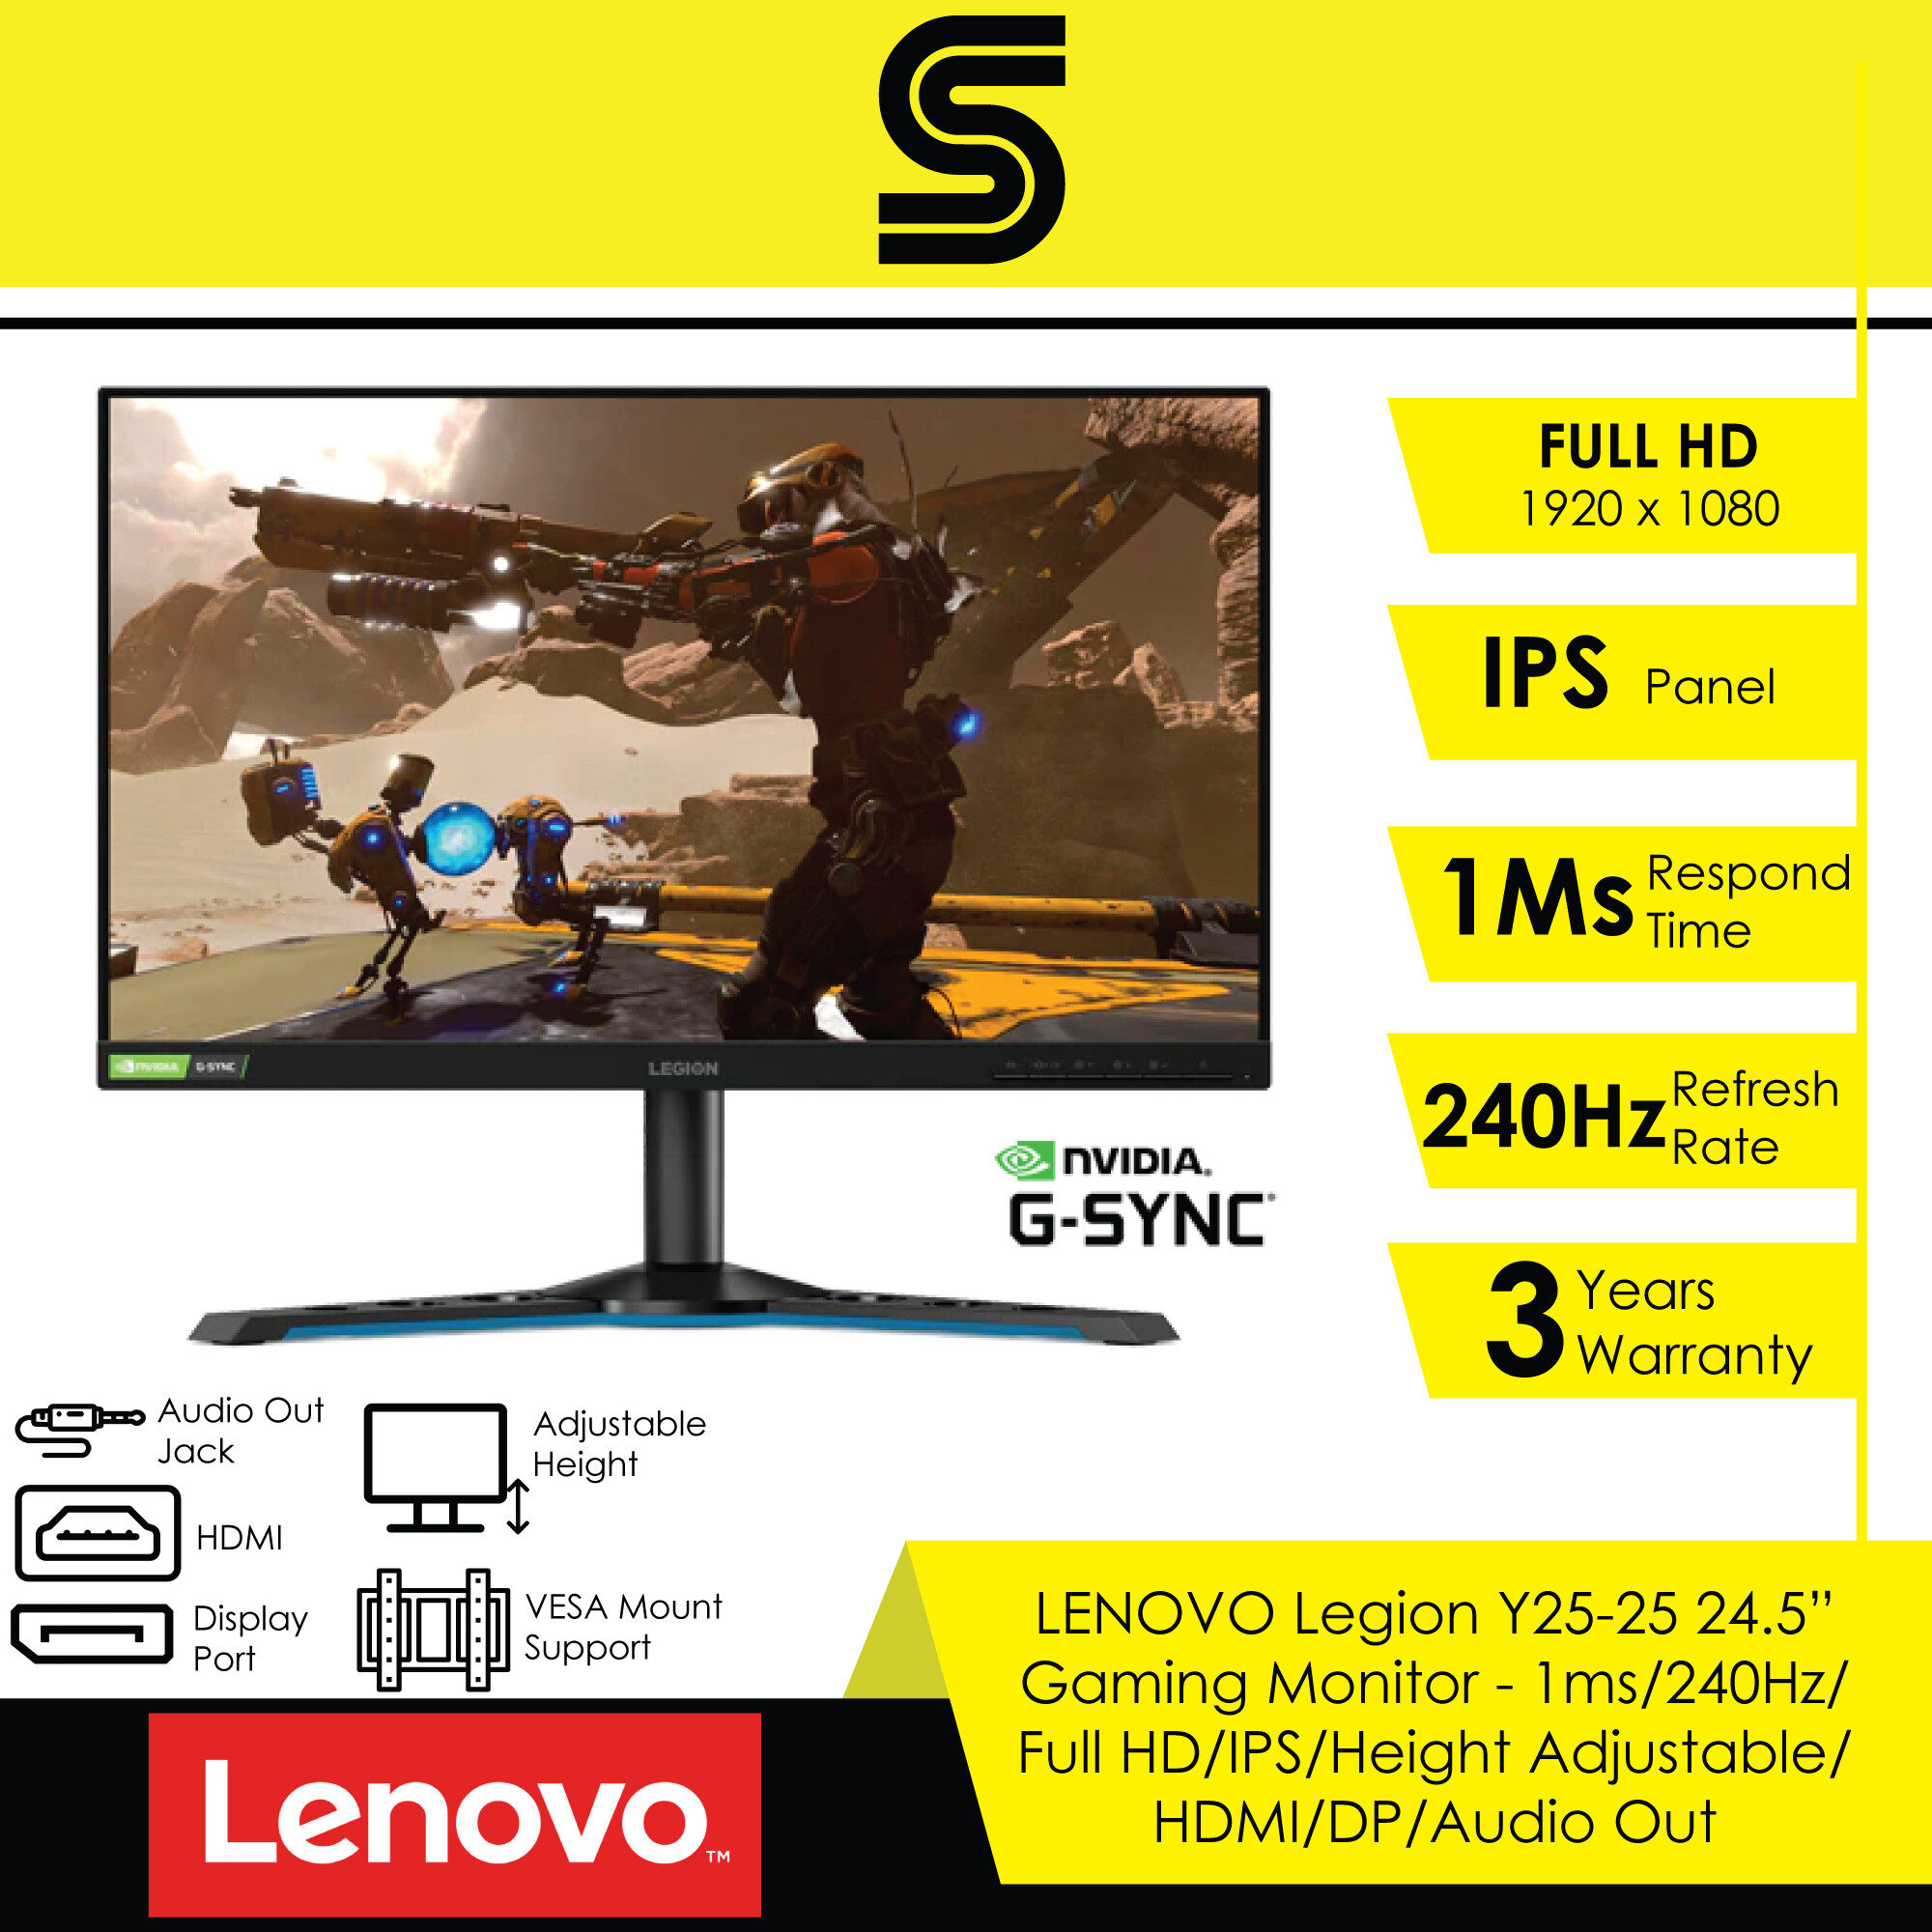 LENOVO Legion Y25-25 Gaming Monitor - 24.5"/1ms/240Hz/FHD/IPS Panel/HDMI/DP/Audio Out/Height Adjust Stand/VESA/NVIDIA G-SYNC Compatible/AMD Radeon Free-Sync Premium